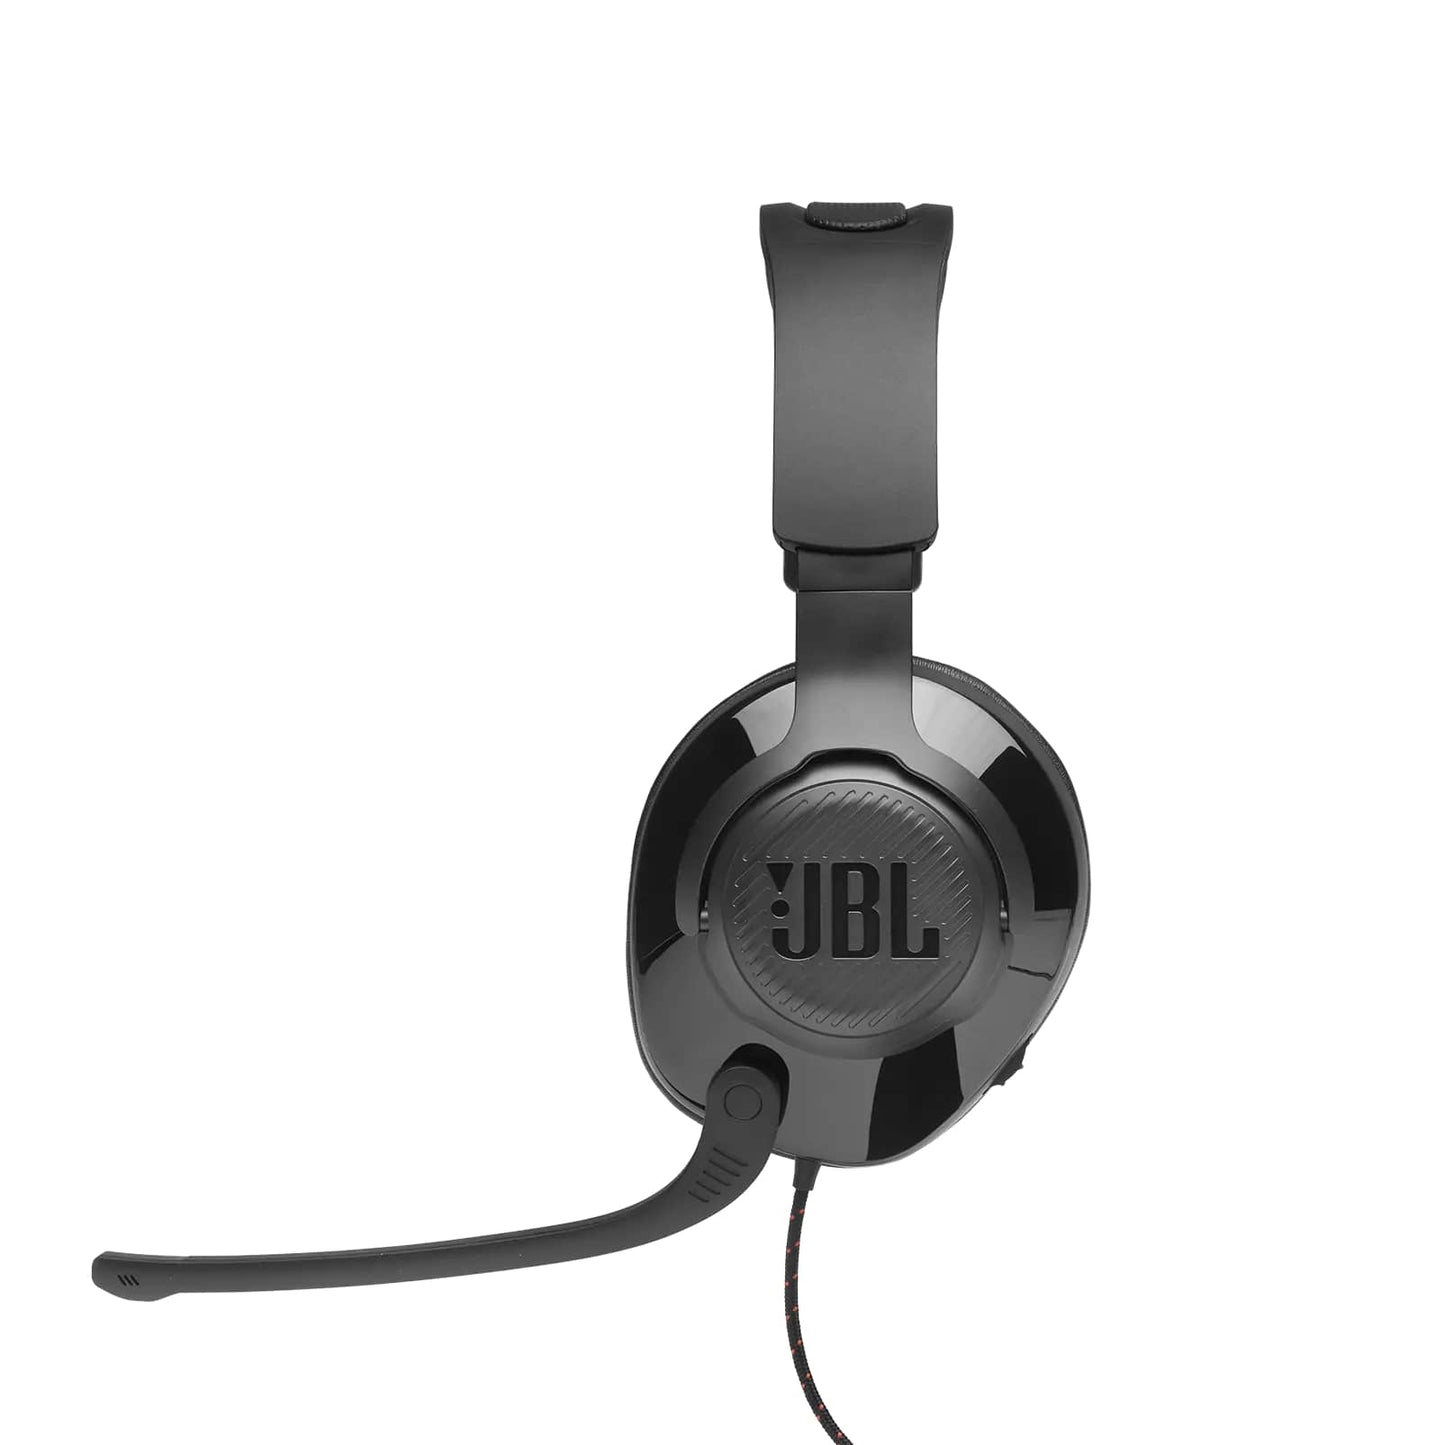 JBL Quantum 300 Over-Ear Wired Gaming Headset Headphones with Nylon Braided Cable, On-Board Surround Sound and 3.5mm AUX TRRS to USB Audio Adapter for PC, Laptop, and Consoles (Black)